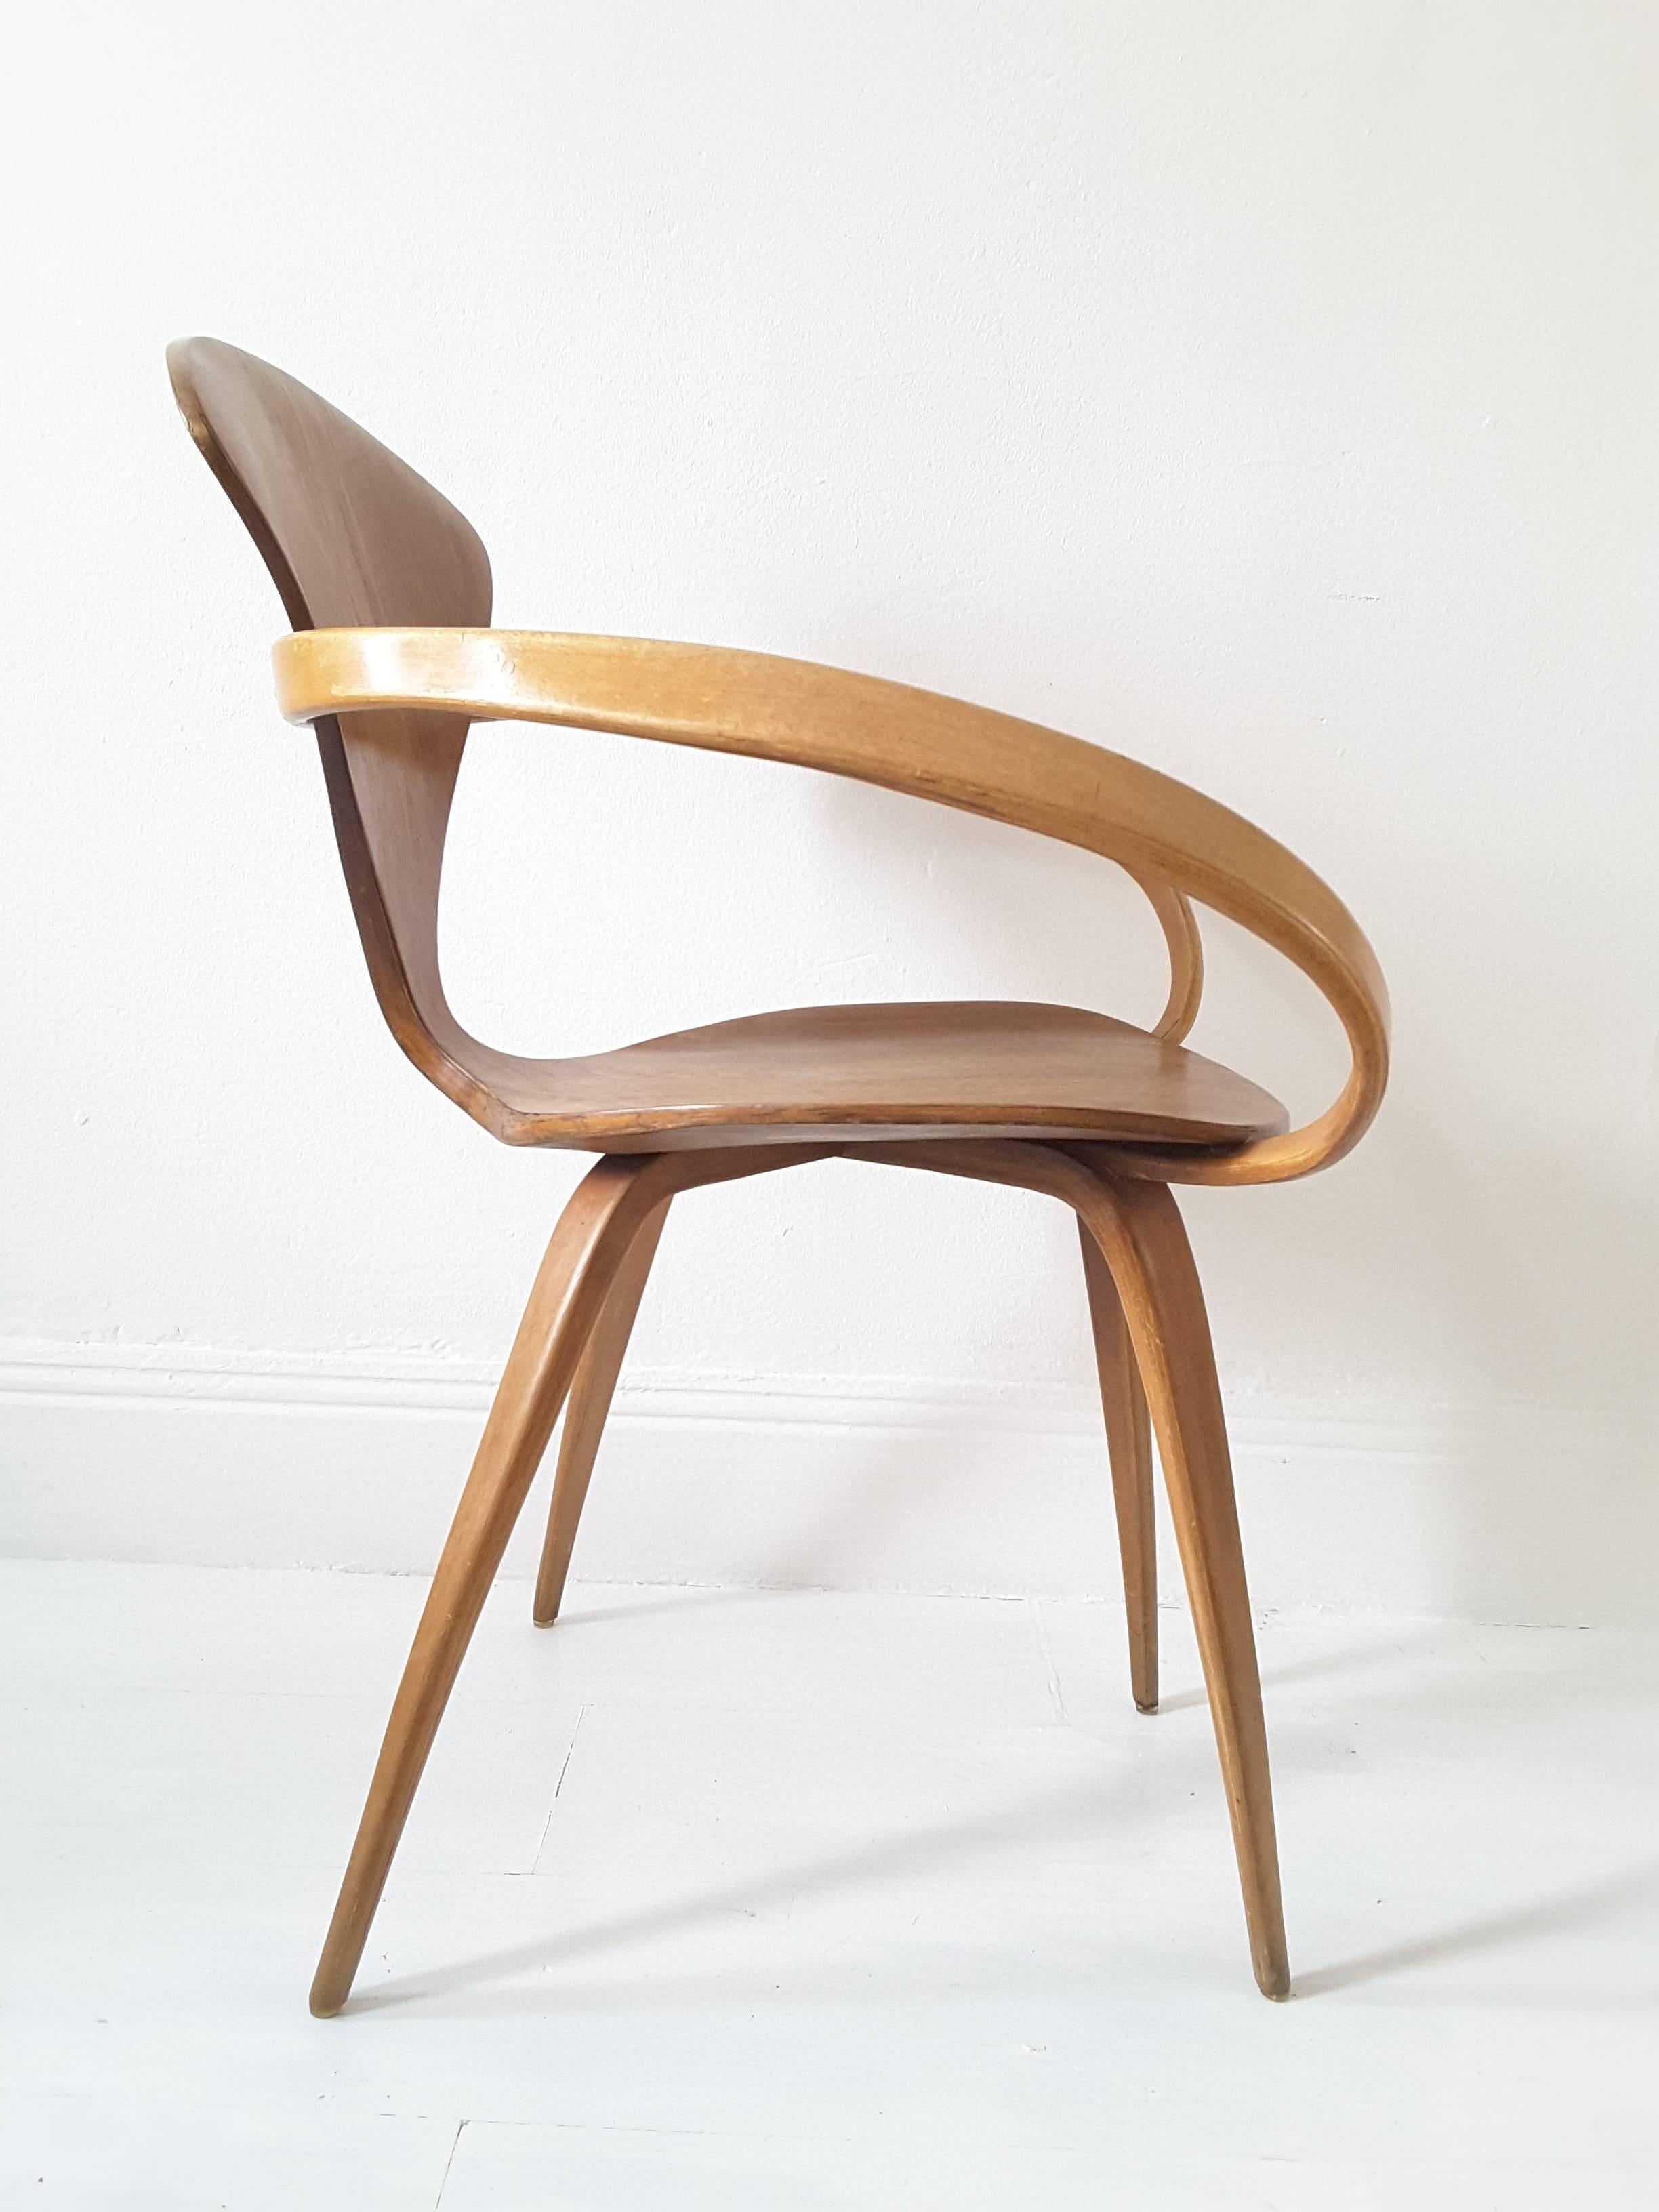 An original 1950s Cherner chair designed by Norman Cherner and produced by Plycraft. Bent plywood construction in beech and walnut. Retains foil label beneath.